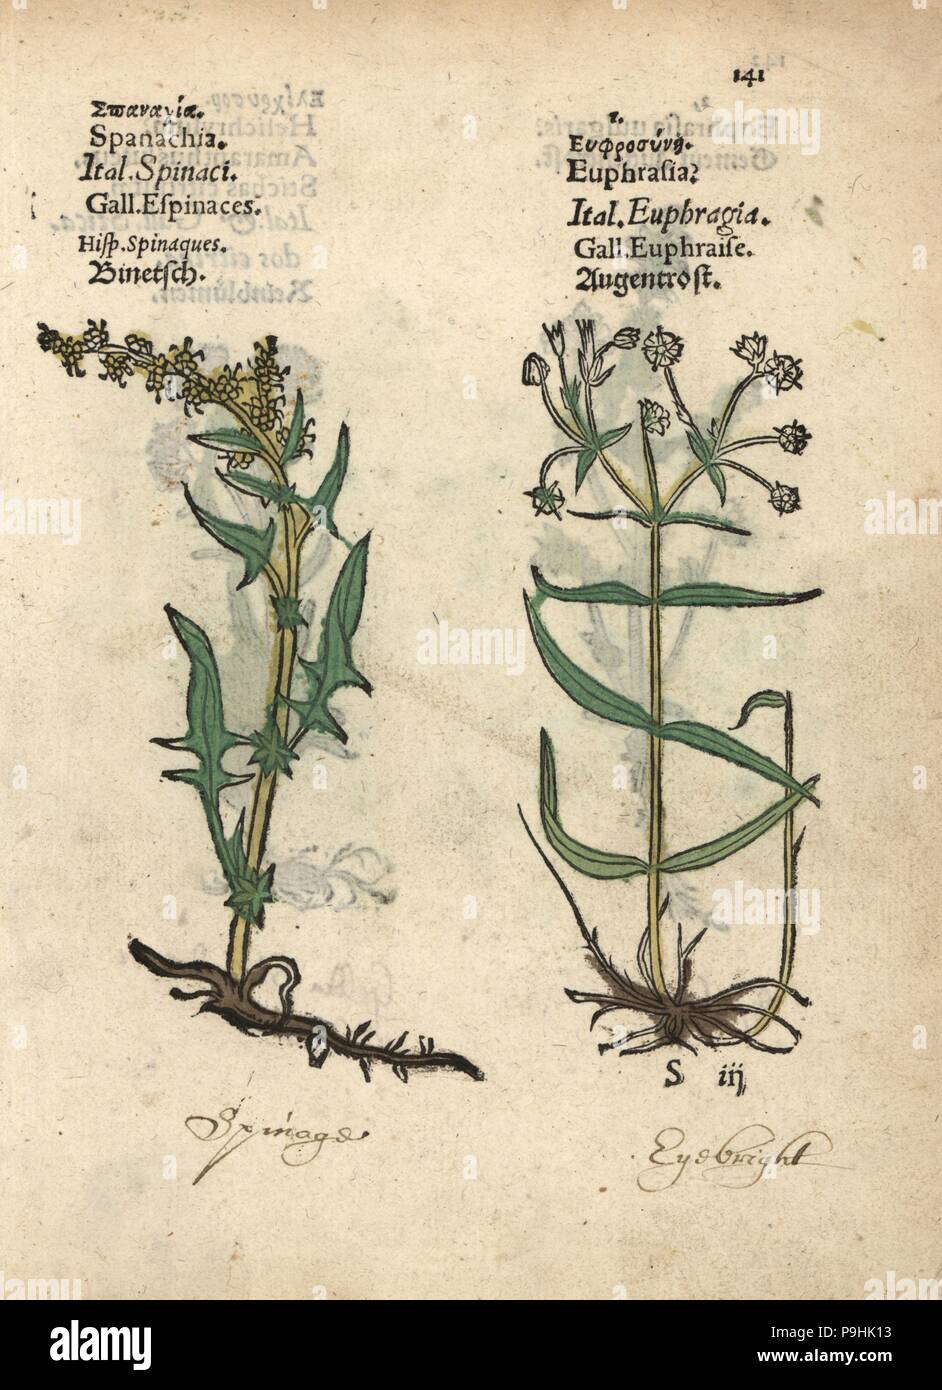 Spinach, Spinachia oleracea, and eyebright, Euphrasia species. Handcoloured woodblock engraving of a botanical illustration from Adam Lonicer's Krauterbuch, or Herbal, Frankfurt, 1557. This from a 17th century pirate edition or atlas of illustrations only, with captions in Latin, Greek, French, Italian, German, and in English manuscript. Stock Photo